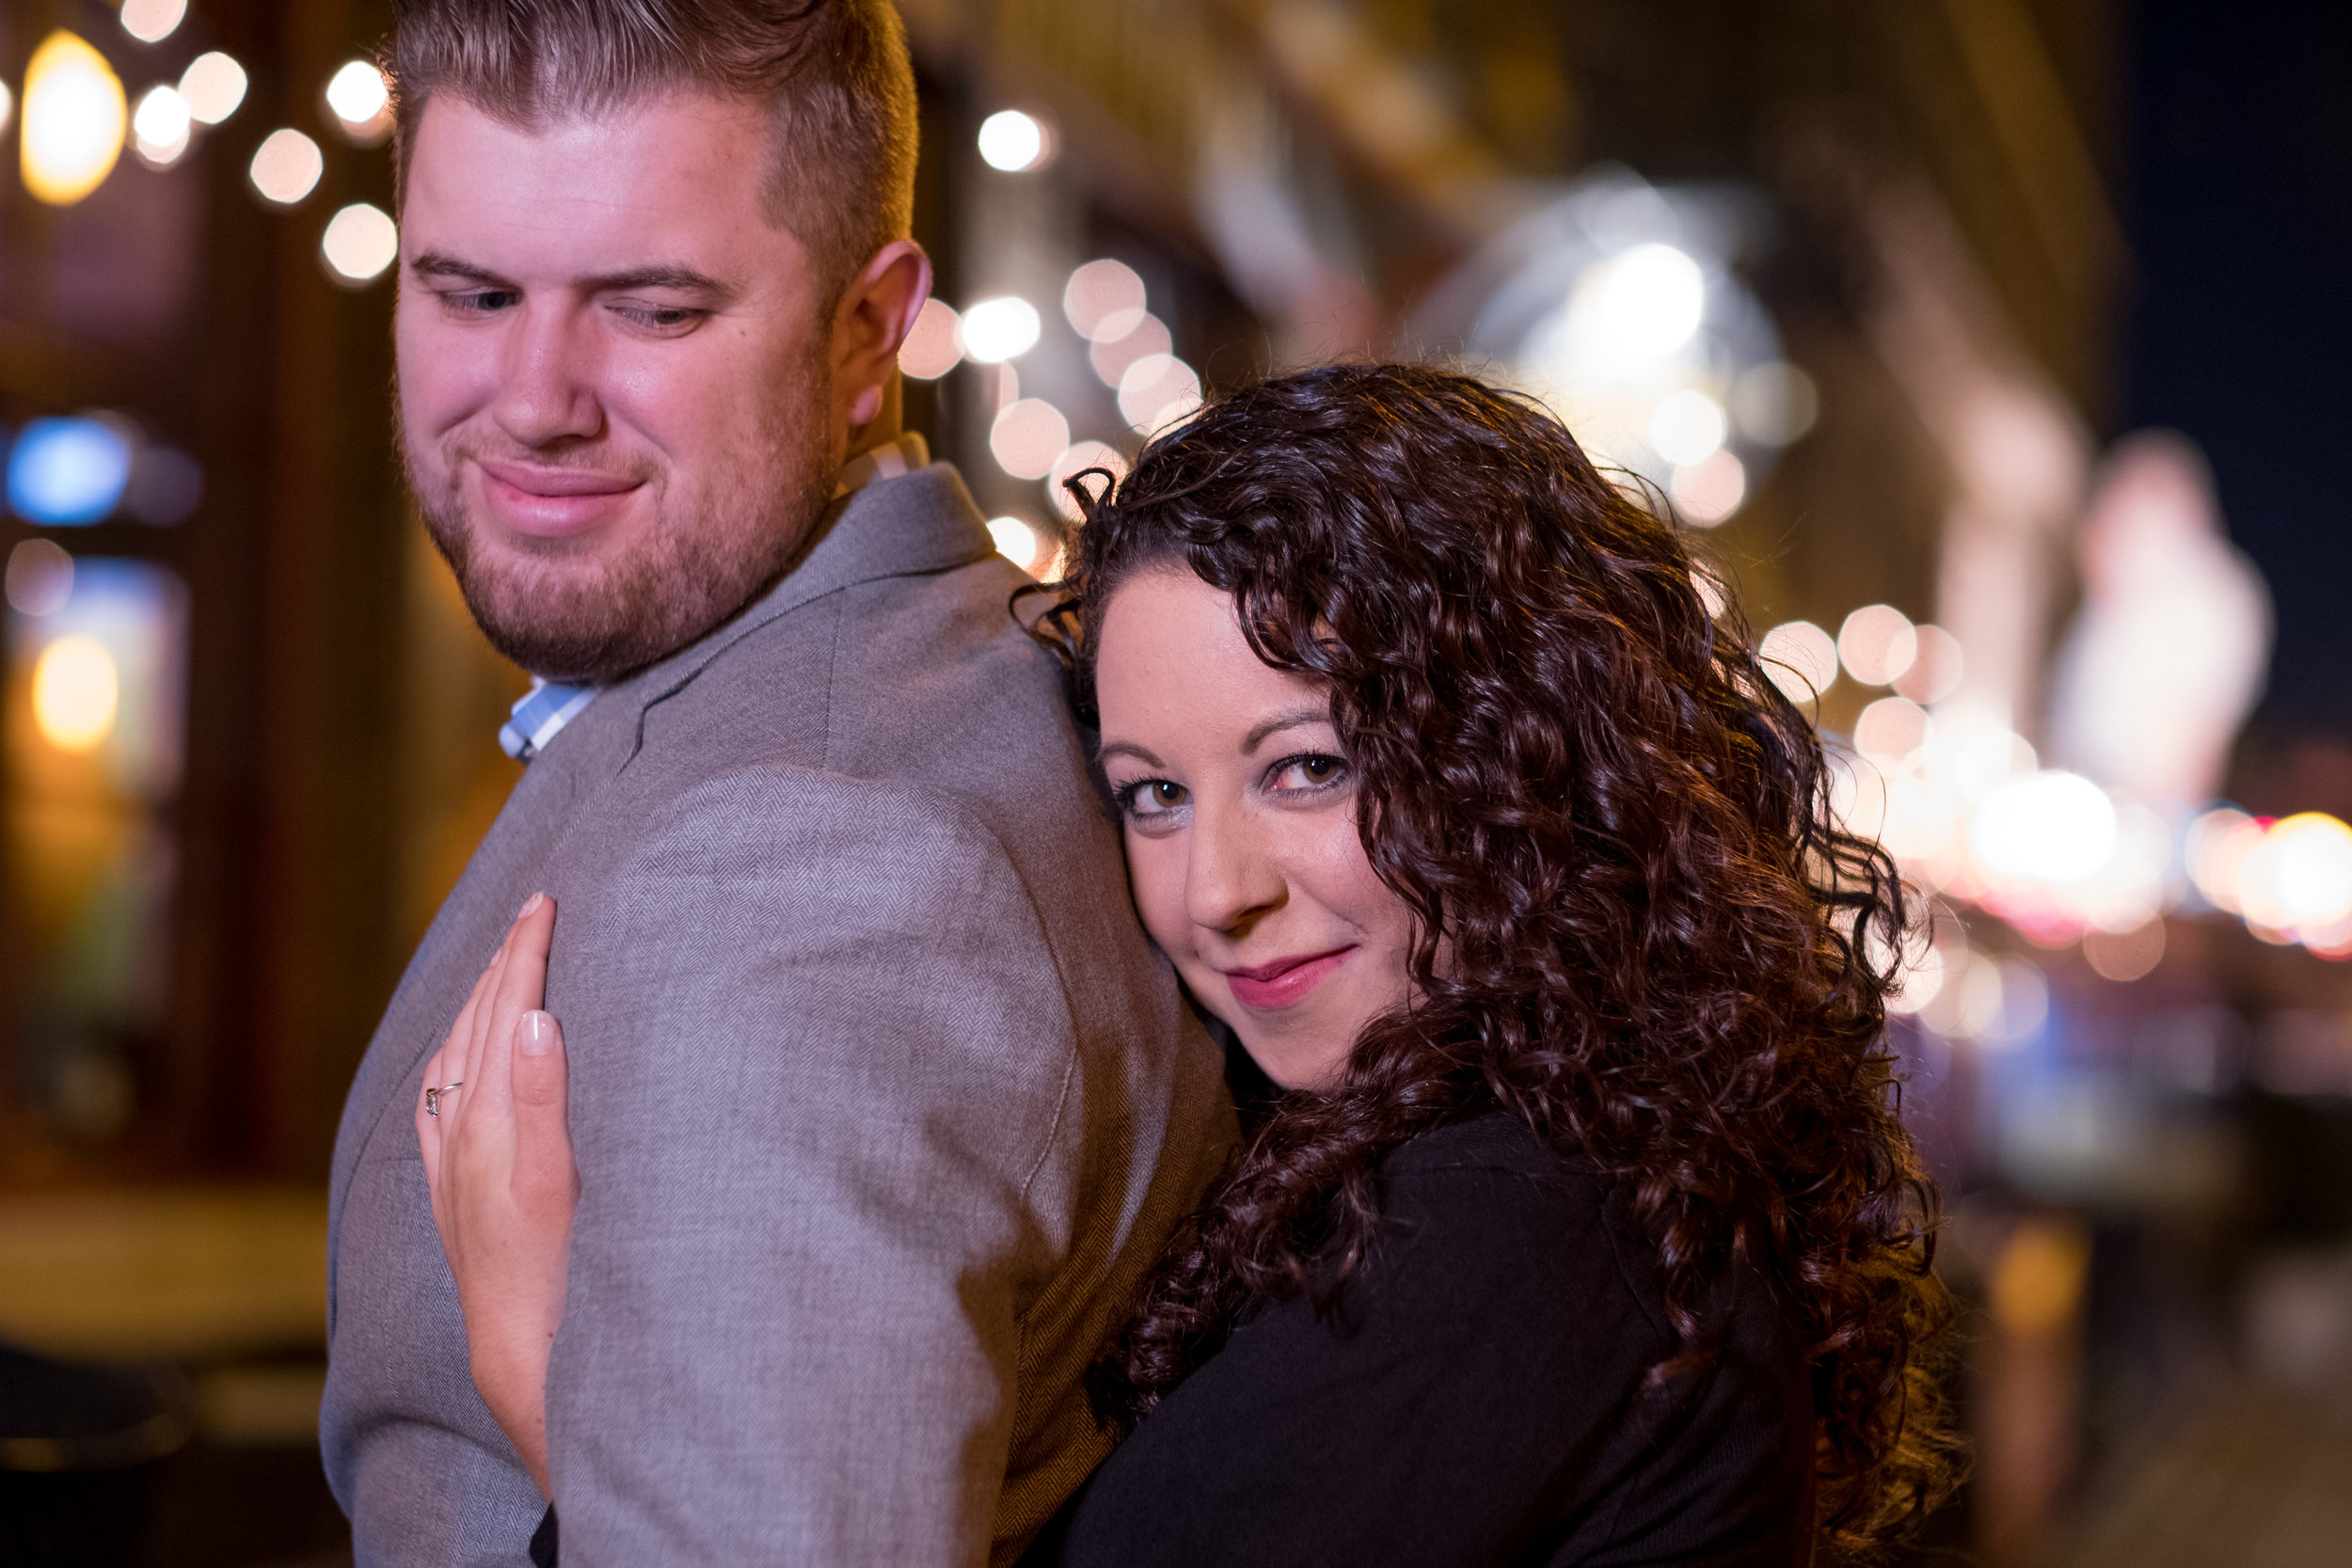 Downtown-Indianapolis-night-engagement-pictures-15.jpg